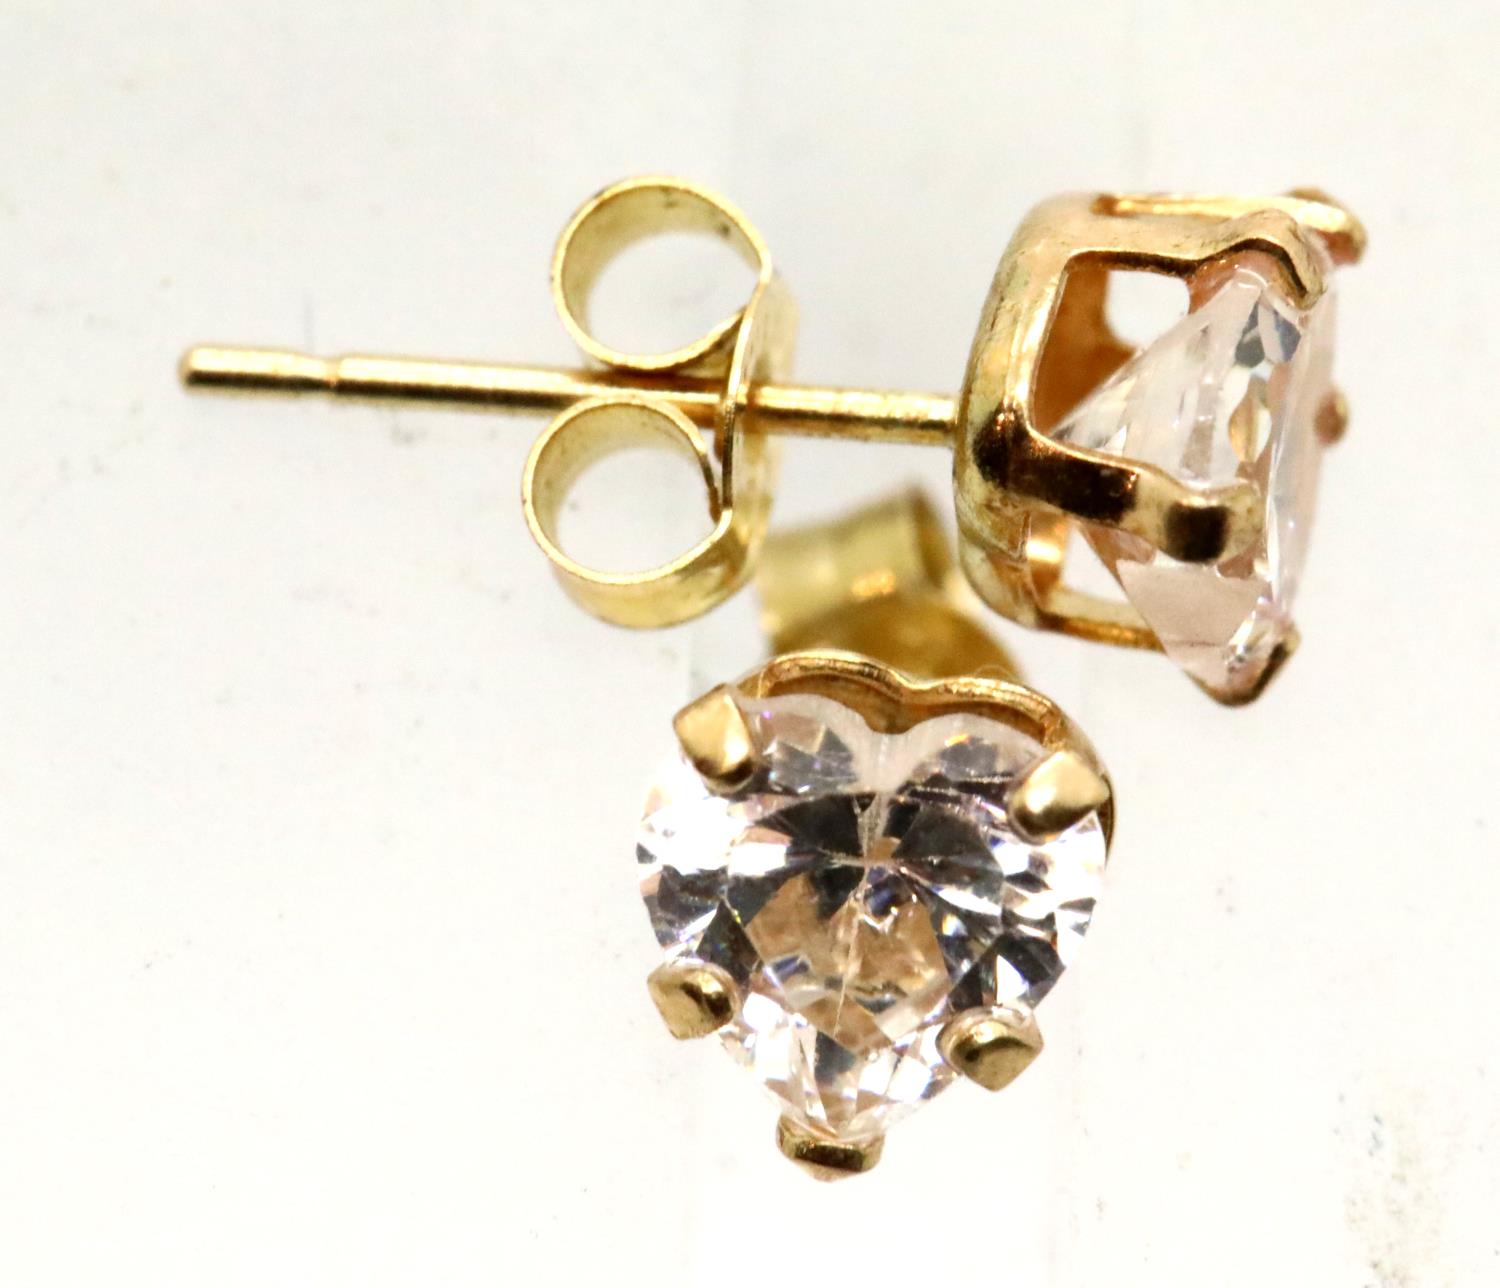 9ct gold, white stone set earrings, 0.7g. P&P Group 1 (£14+VAT for the first lot and £1+VAT for